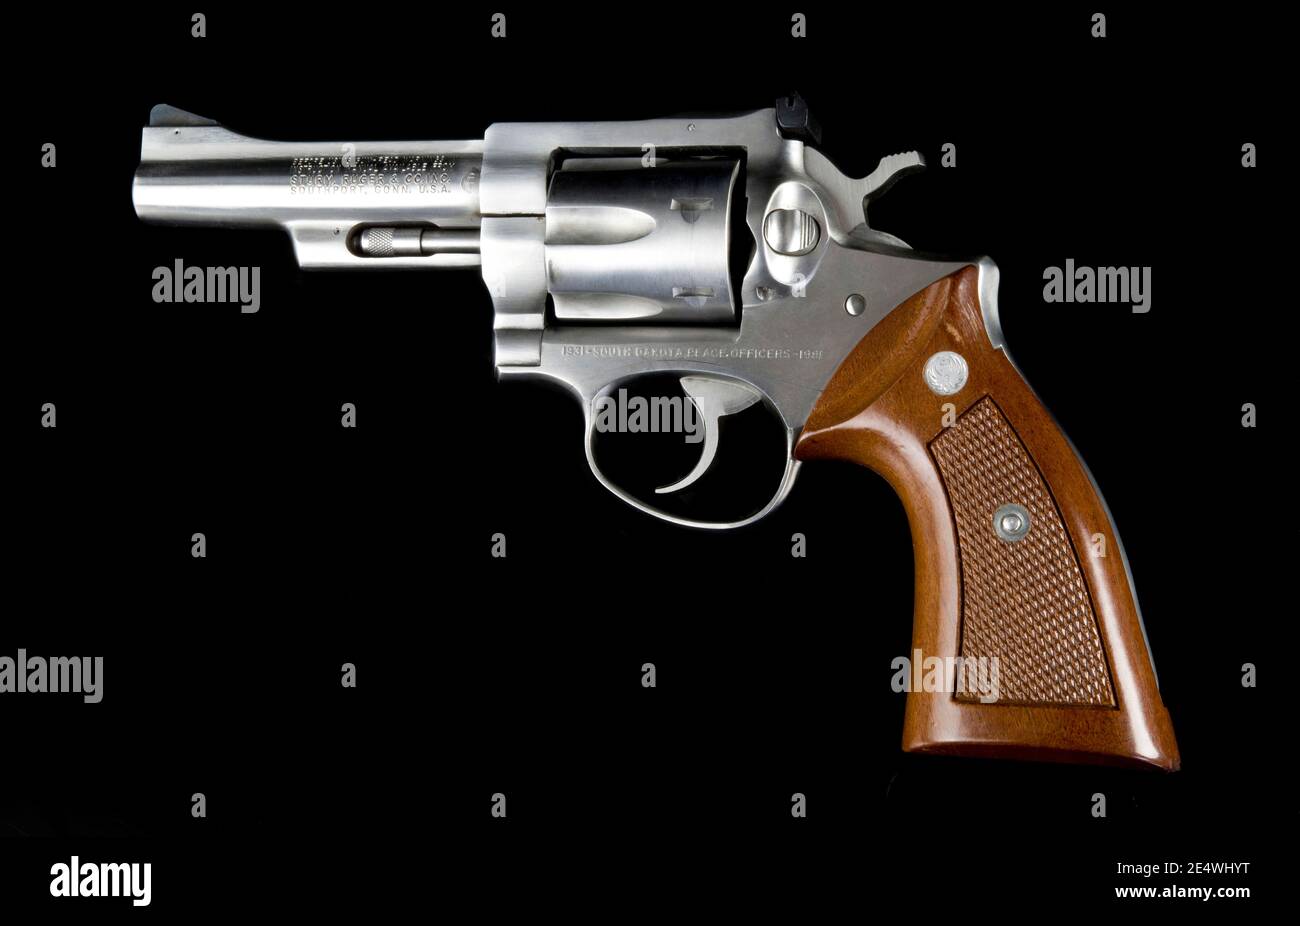 Dallas,Texas - Jan. 2021   Ruger 357 magnum revolver six shooter owned by a Peace officer. Stock Photo